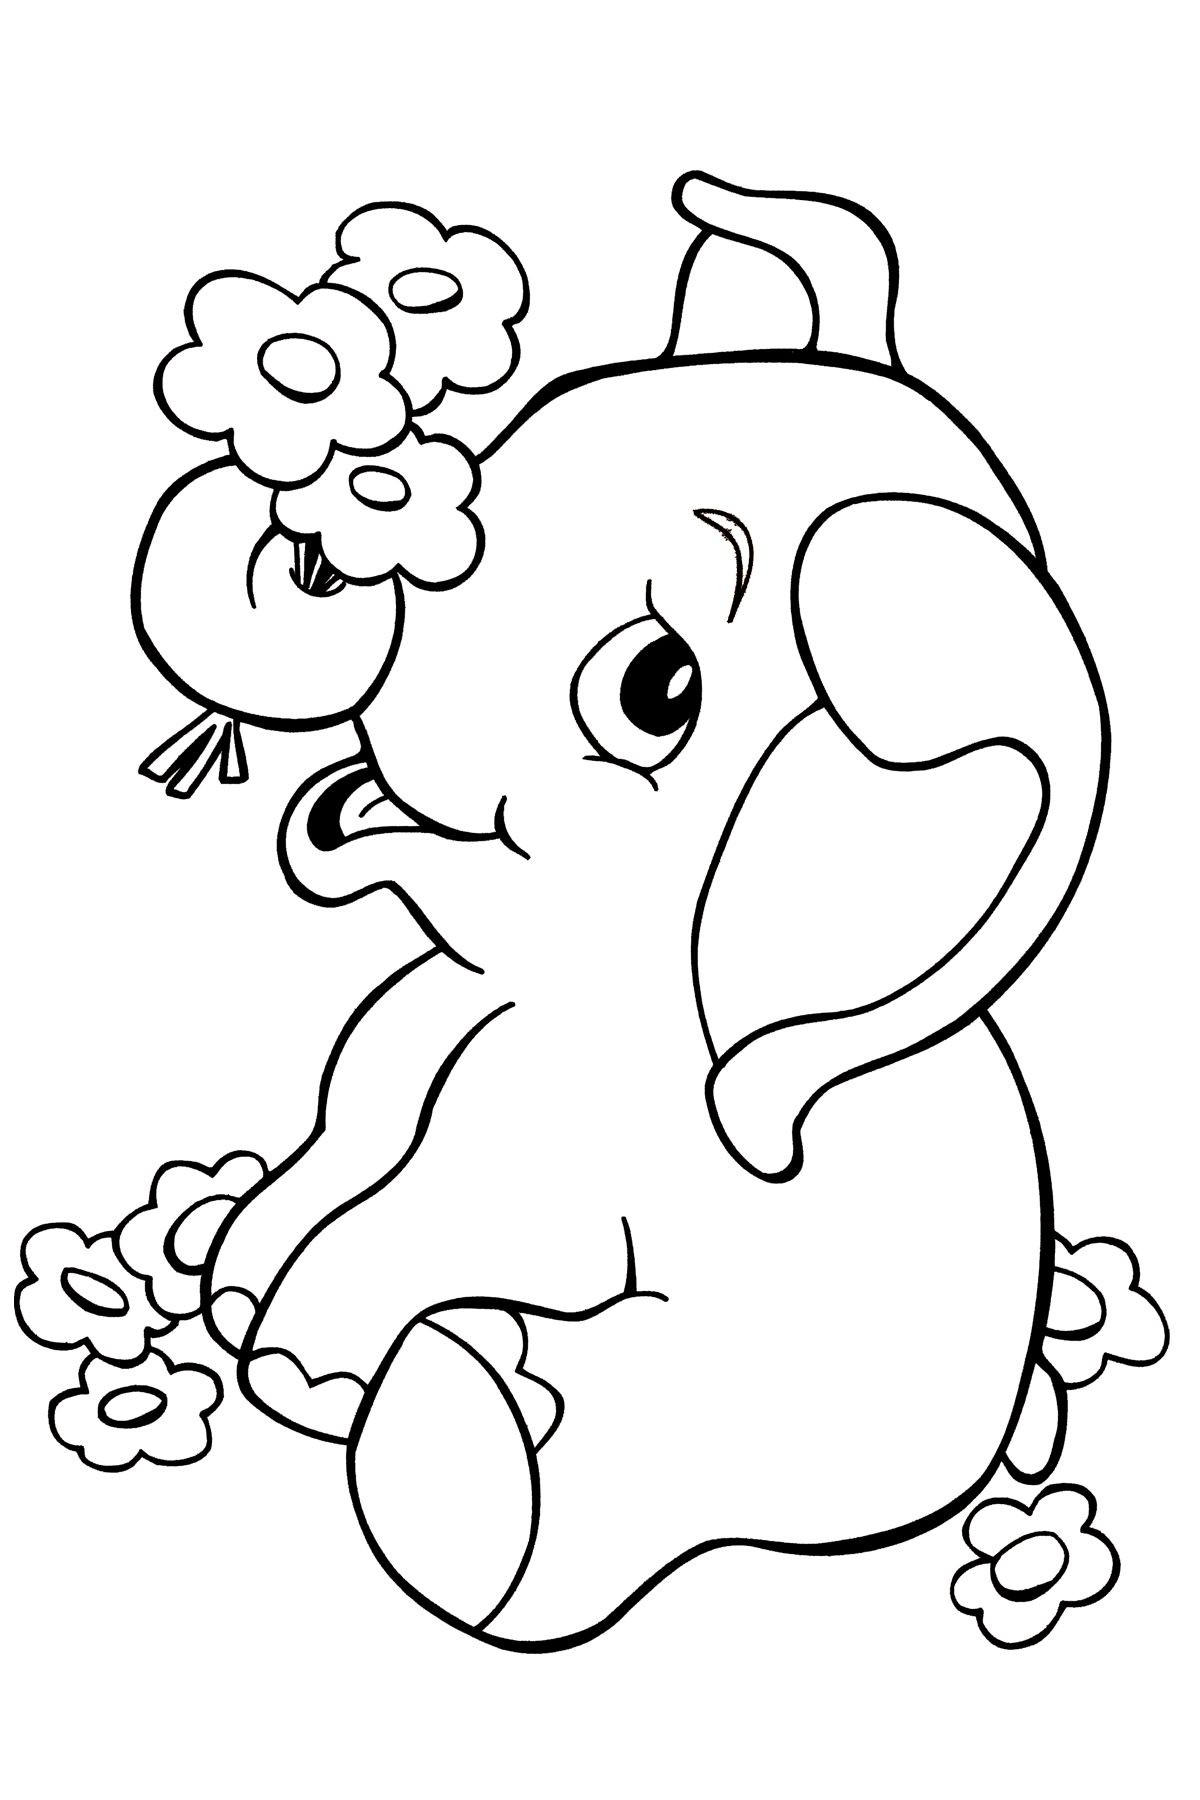 Animals Coloring Pages For Kids
 Jungle Coloring Pages Best Coloring Pages For Kids